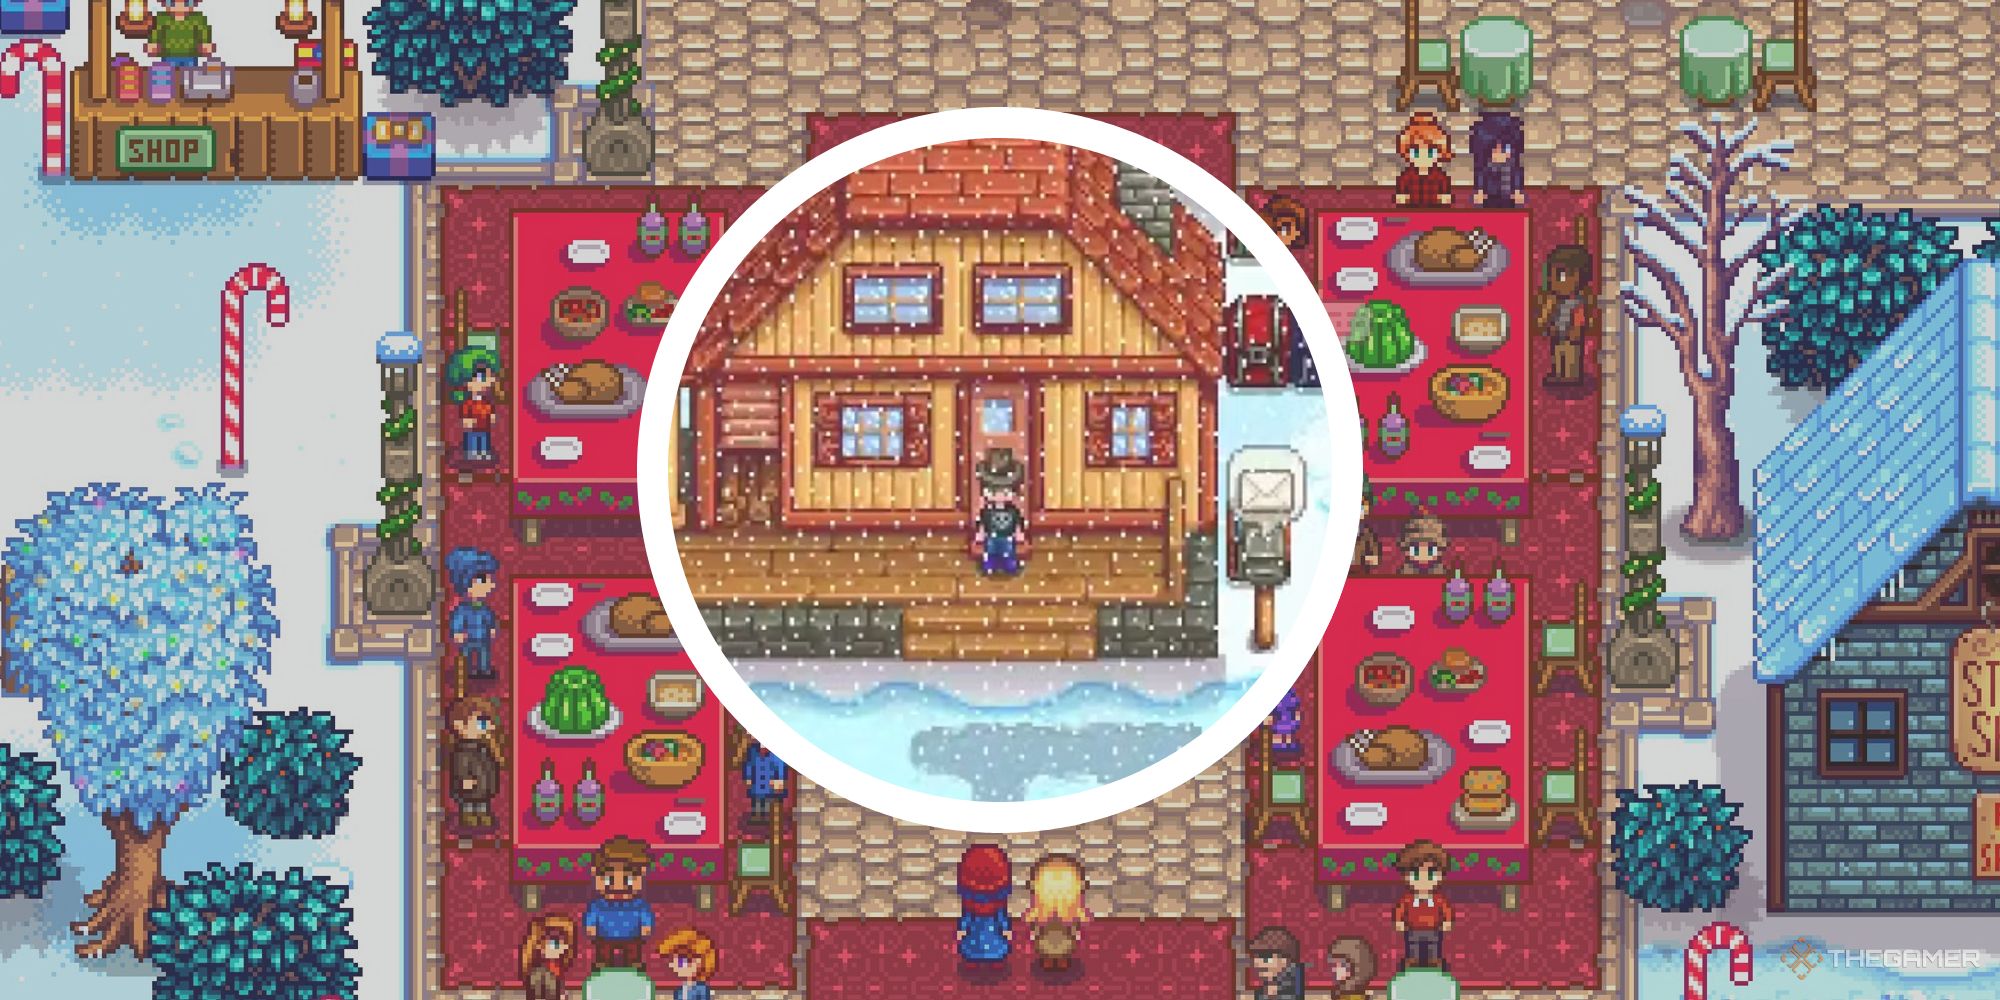 stardew valley image of player in farm over image of winter feast